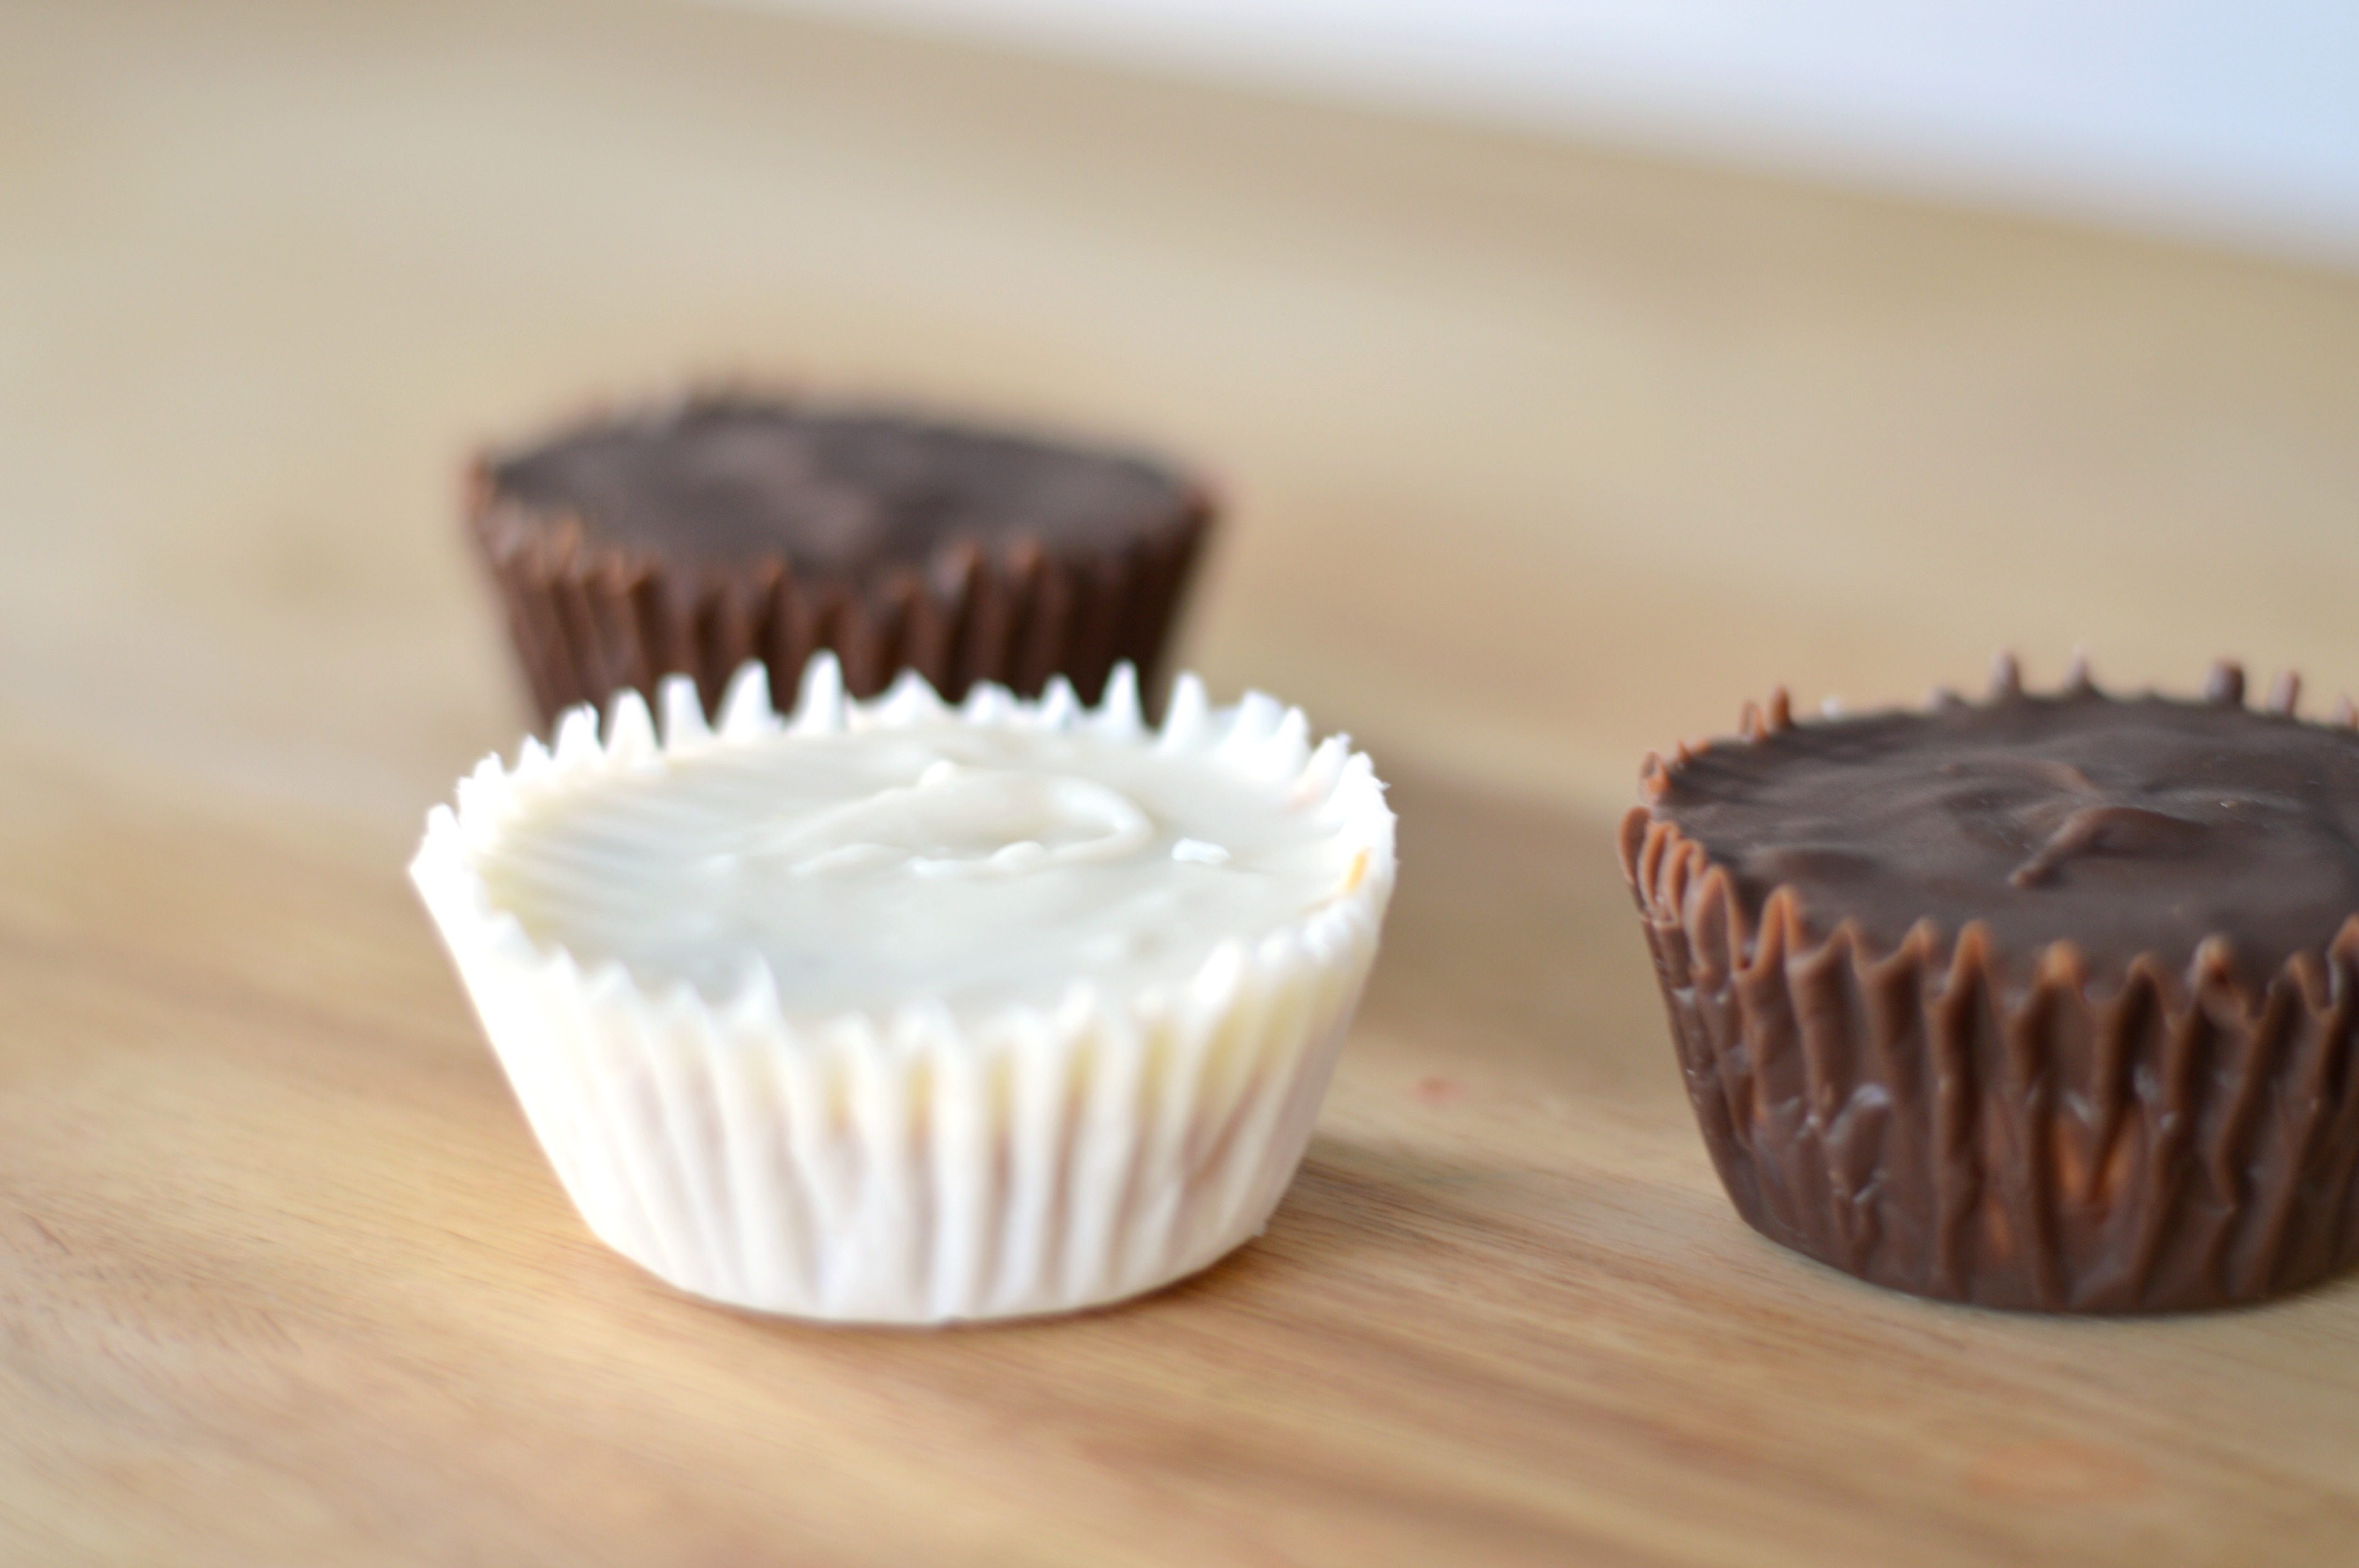 Peanut butter cups ready to eat